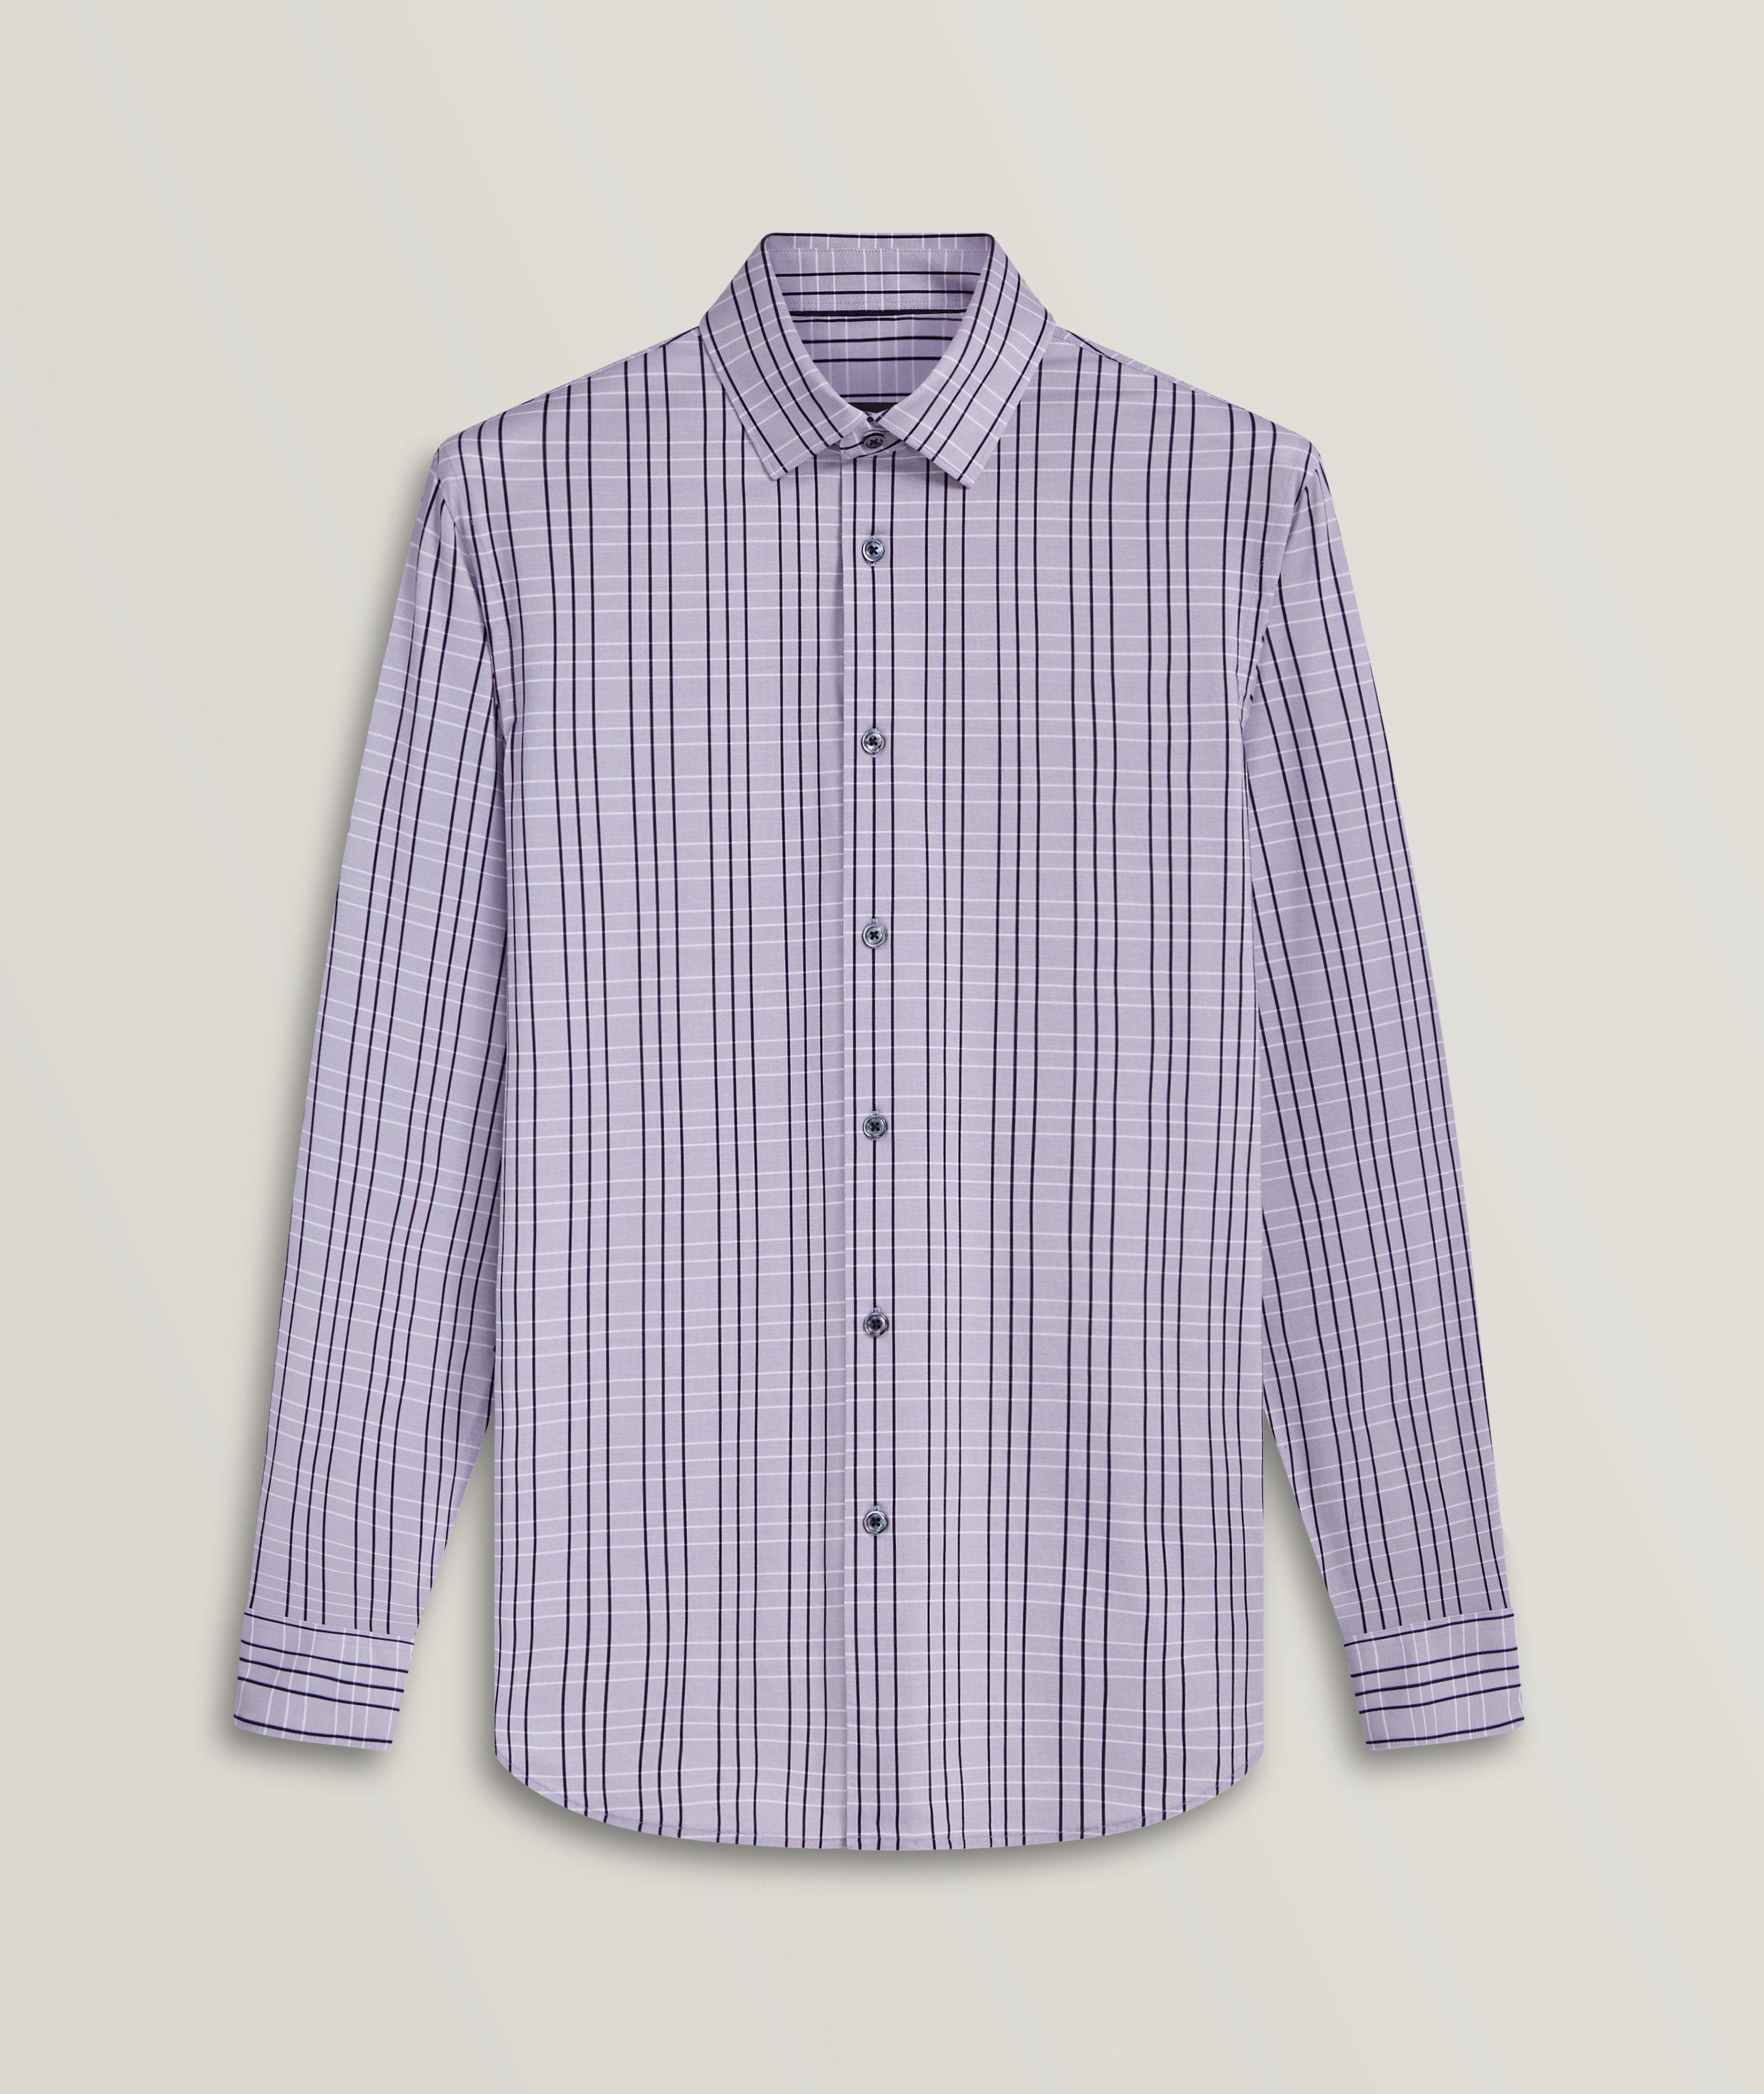 James Checked Stretch-OoohCotton Sport Shirt image 0